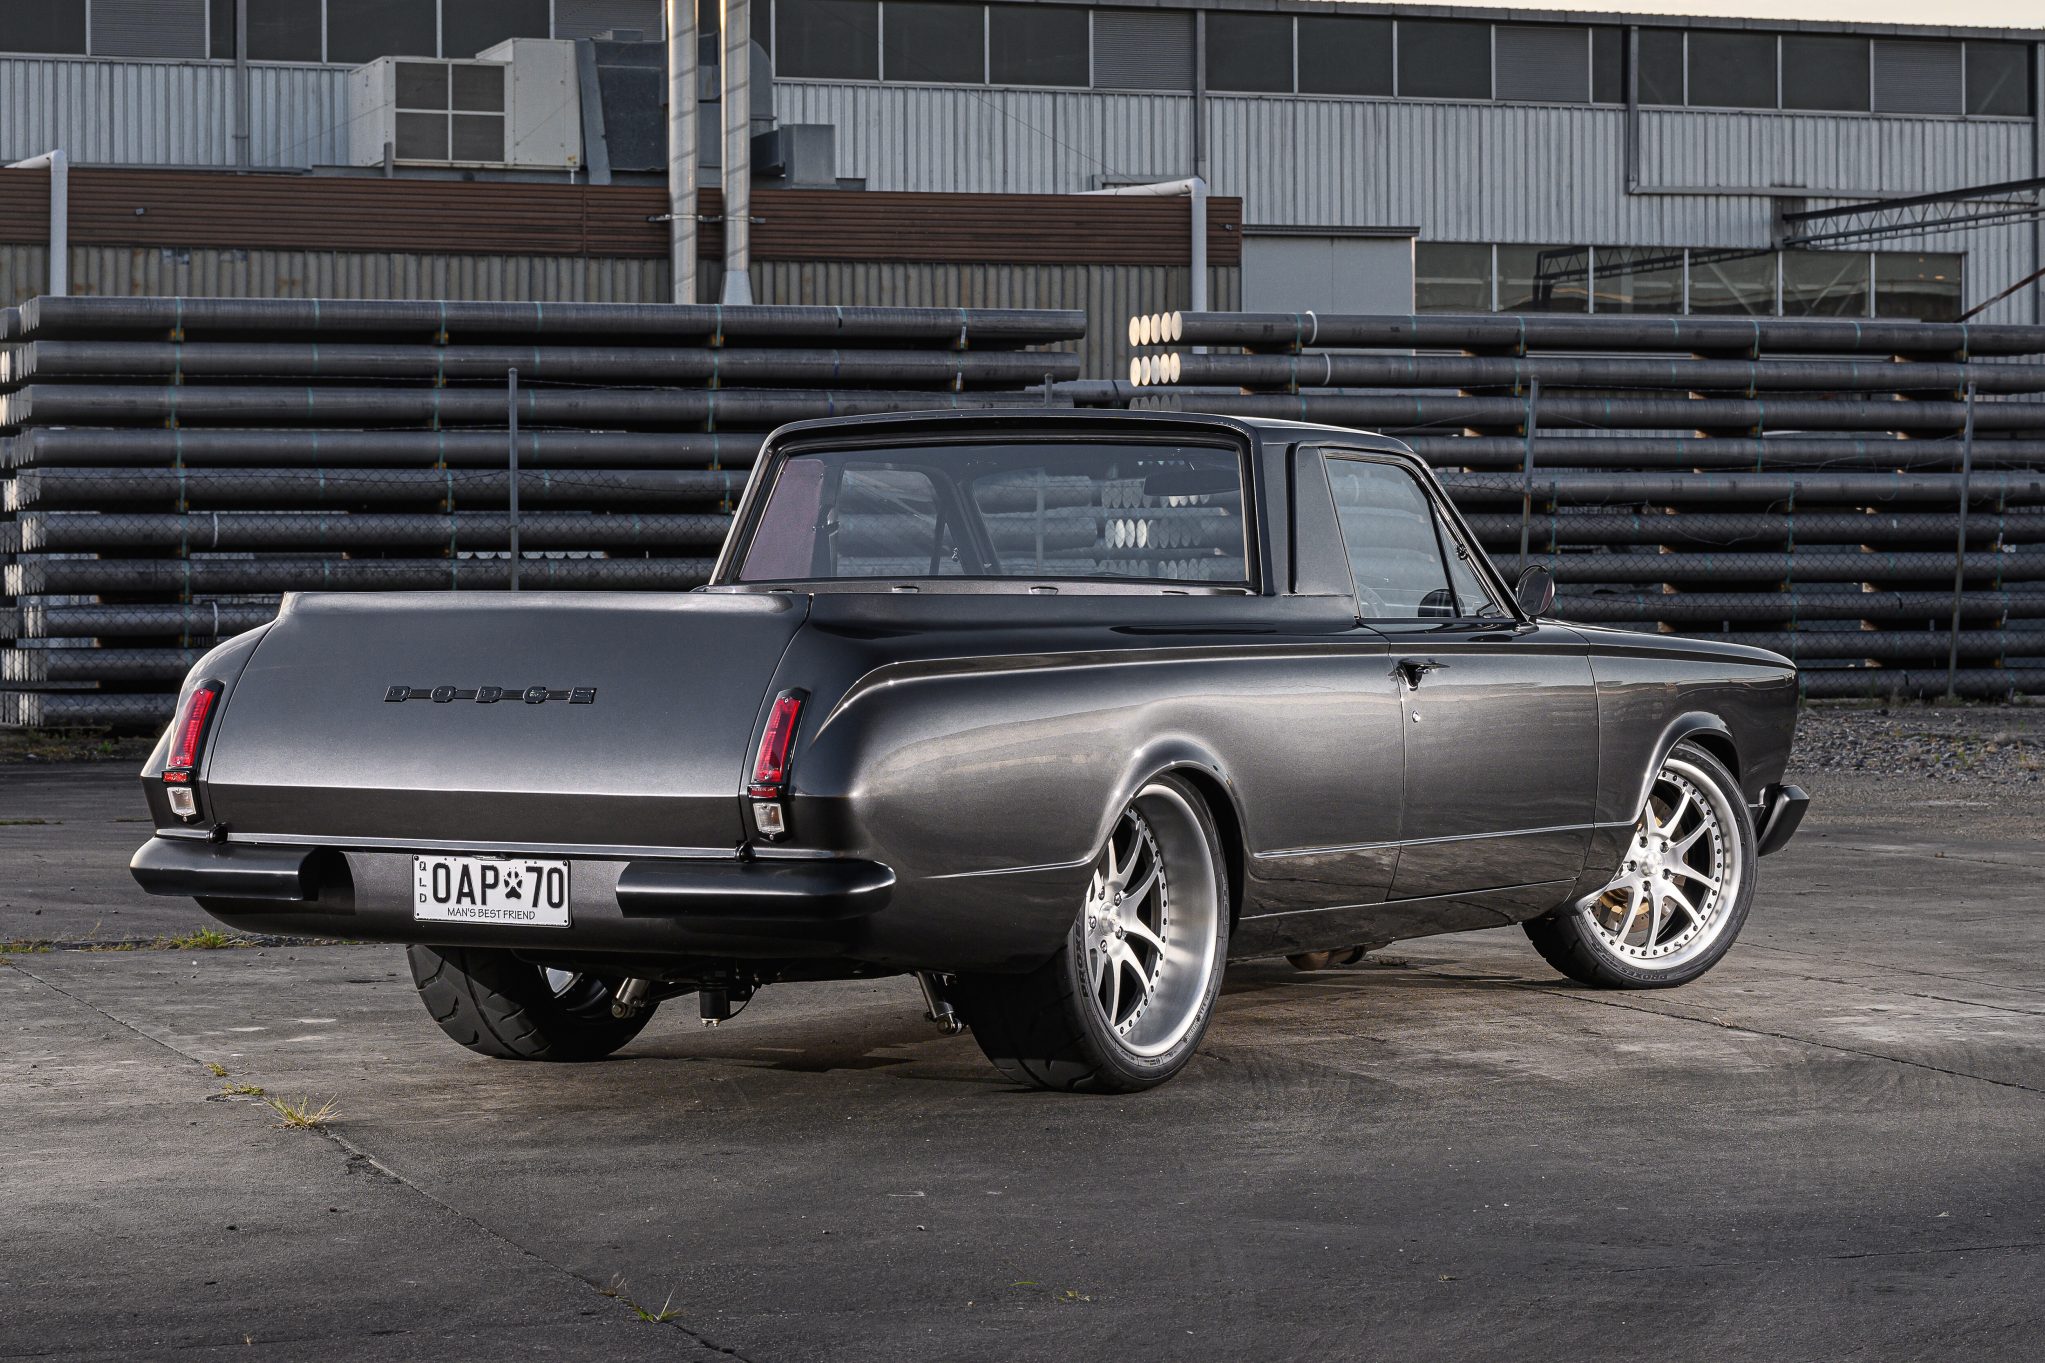 Street Machine Features Scott Campbell Dodge Ute Rear Angle Crop